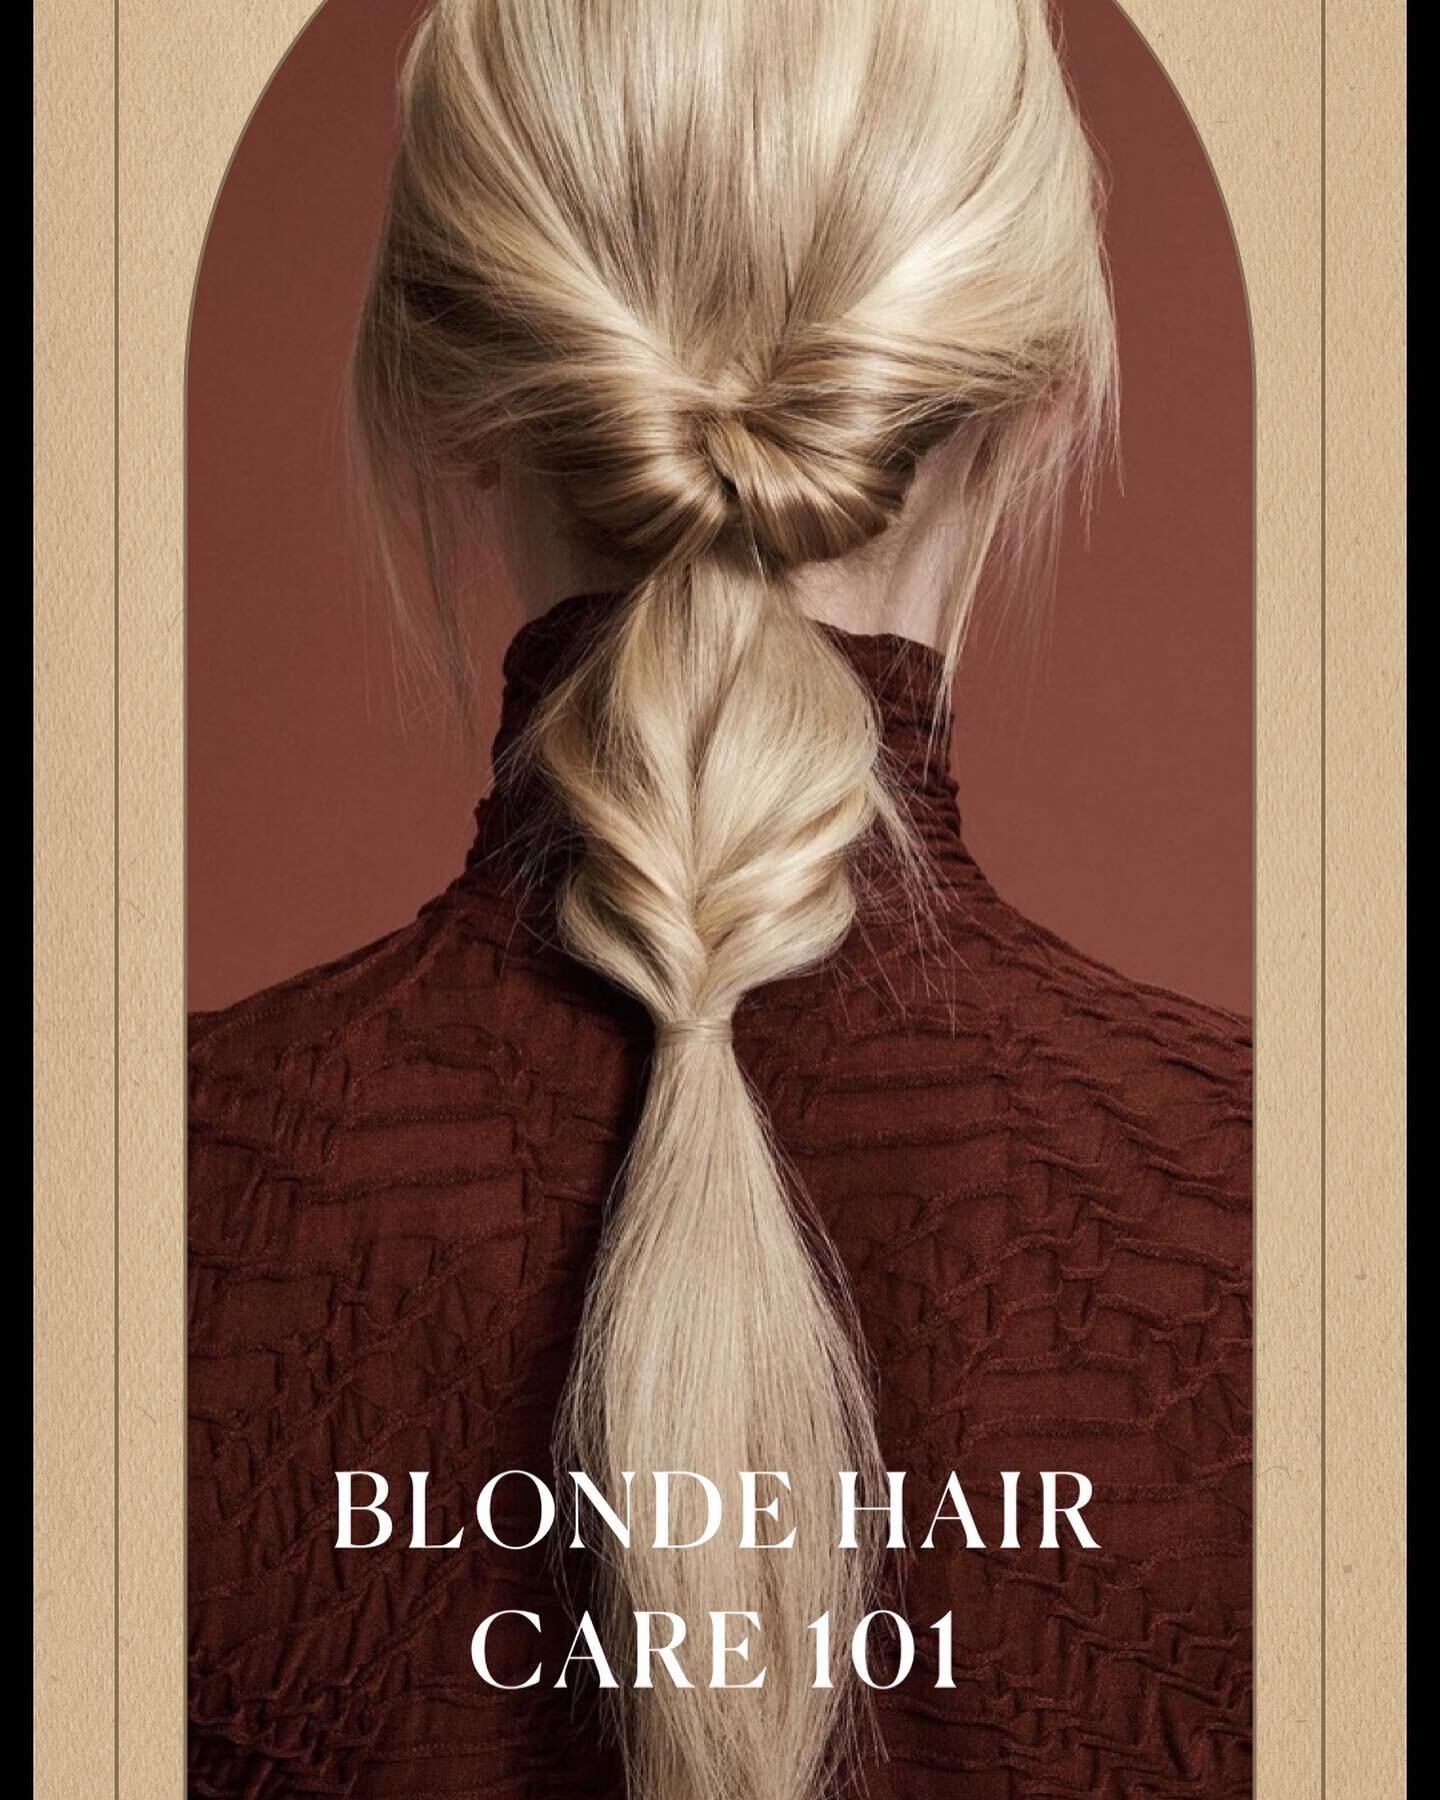 BLONDE HAIR CARE 101 👩🏼&zwj;🏫

Tips to maintain blonde:
&bull; Use toning shampoo
&bull; Load up on masks and treatments
&bull; Alternate between protein and moisture products
&bull; Protect your hair from heat
&bull; Get regular haircuts